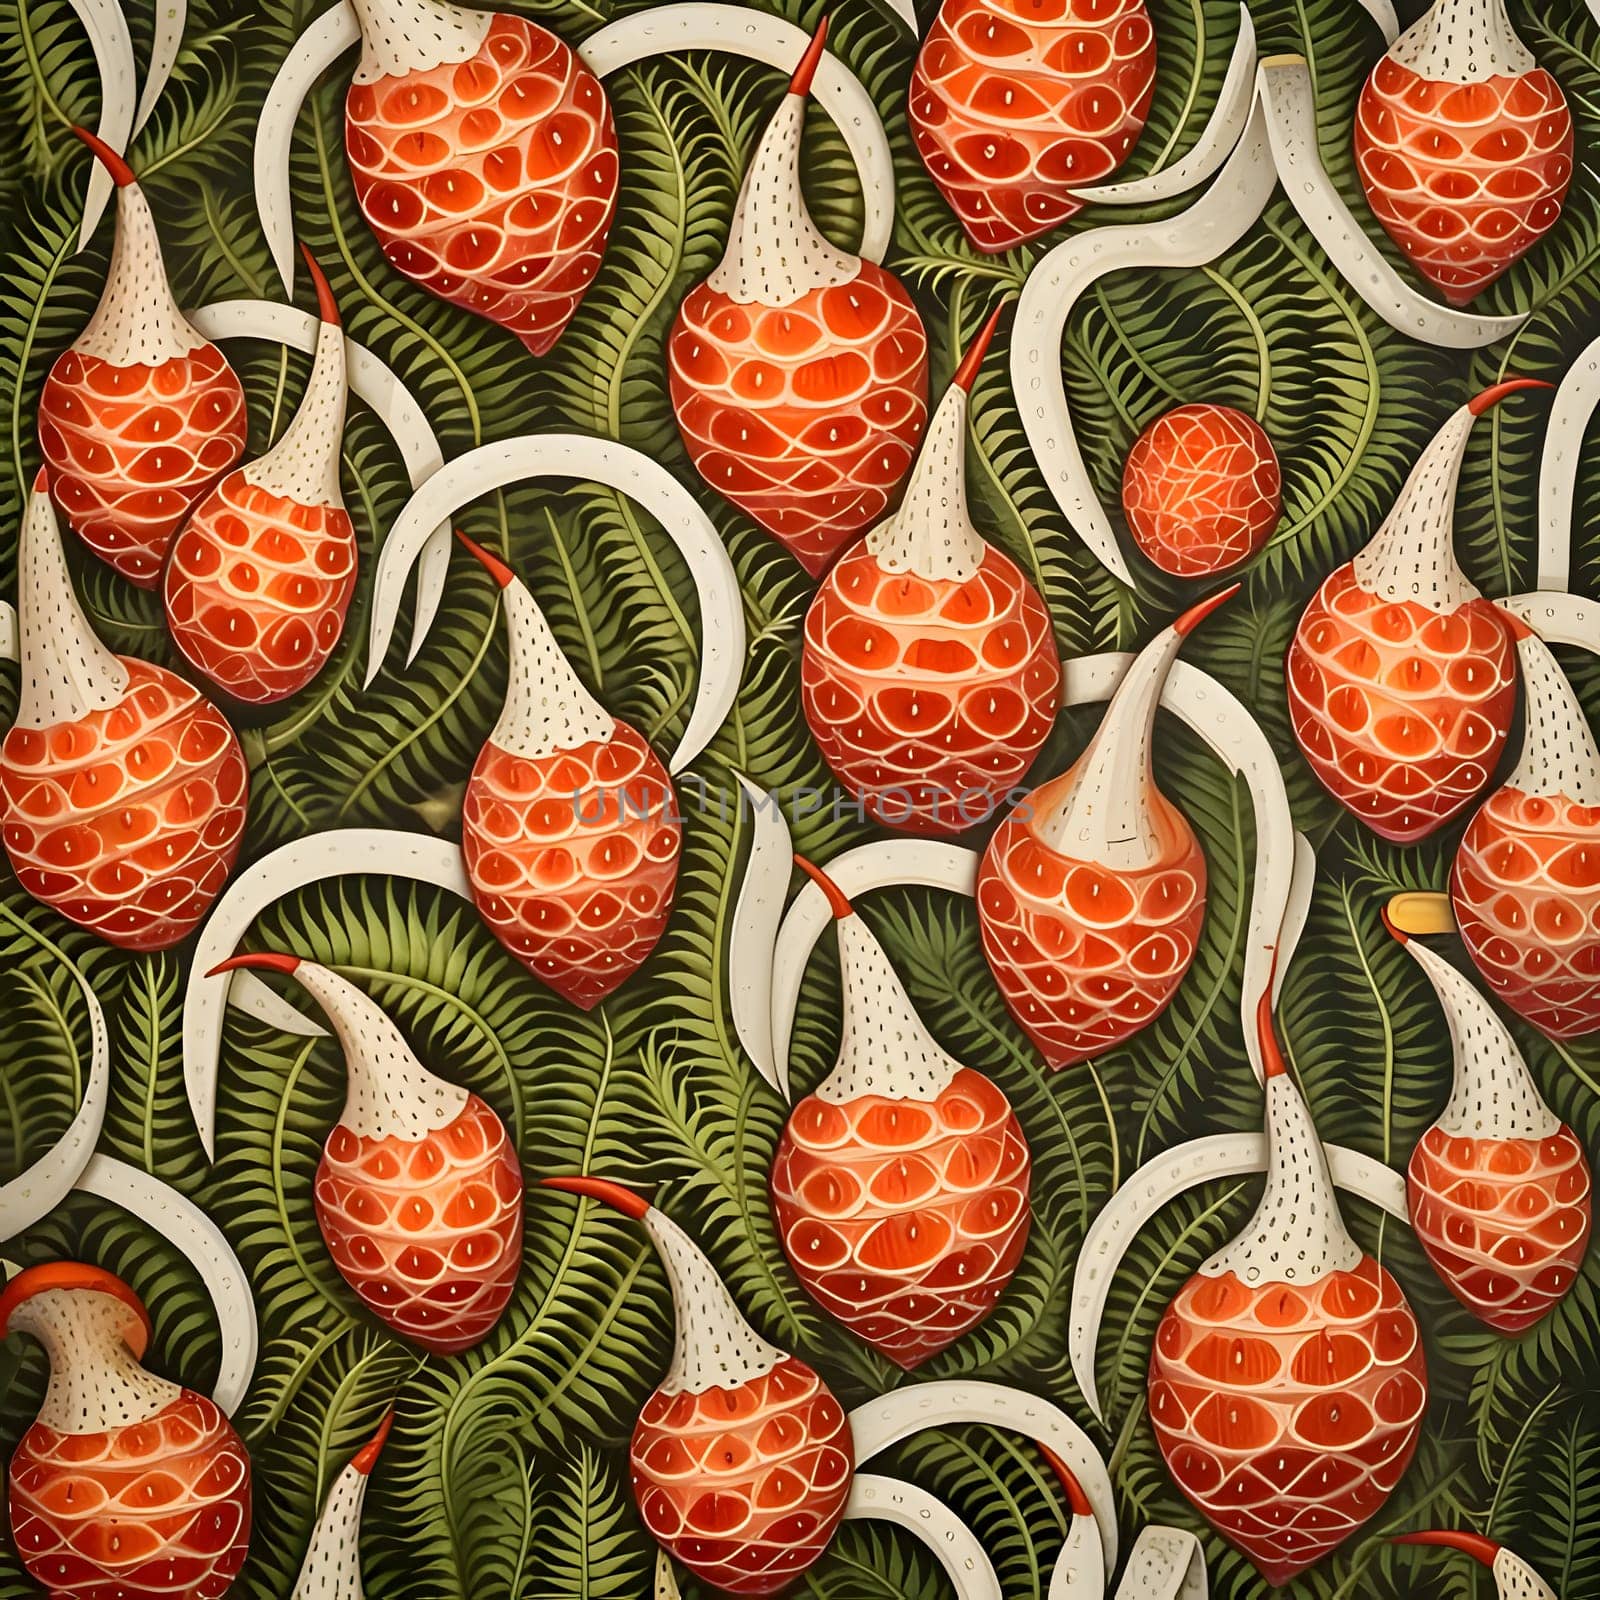 Patterns and banners backgrounds: Seamless pattern with hand drawn tropical fruits. Vector illustration.